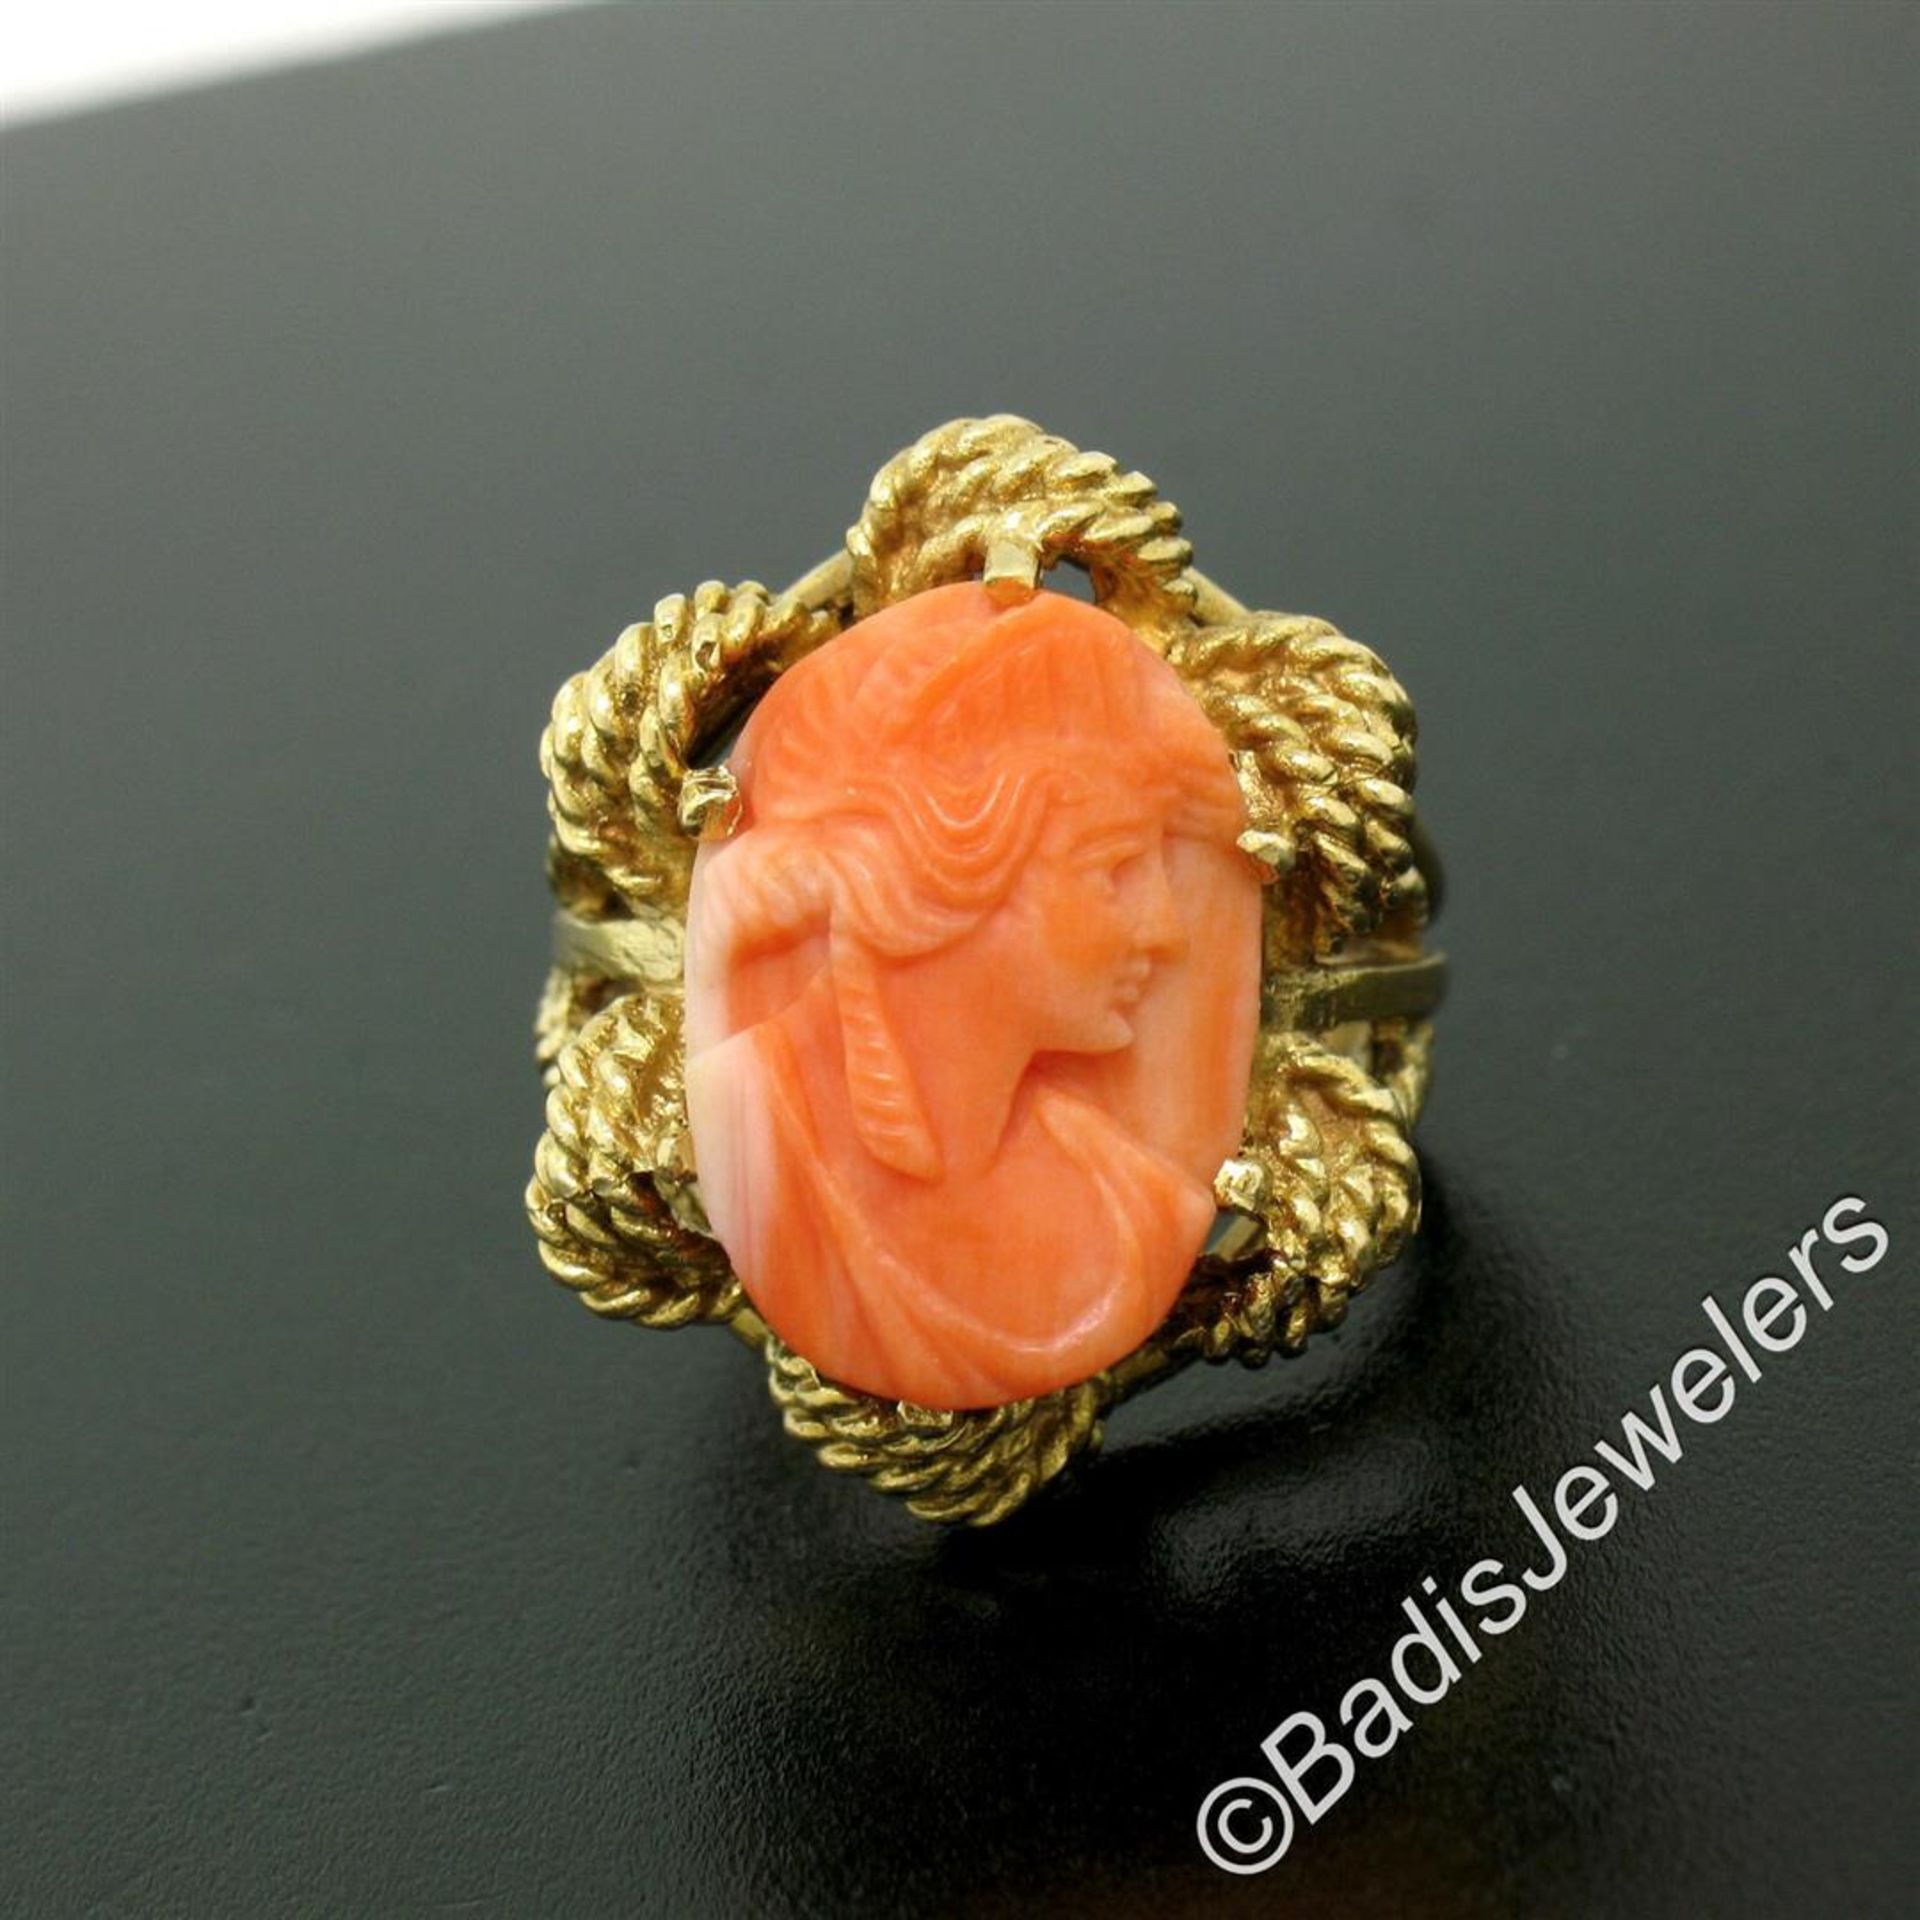 Vintage 14kt Yellow Gold Carved Coral Cameo Solitaire Ring - Image 2 of 7